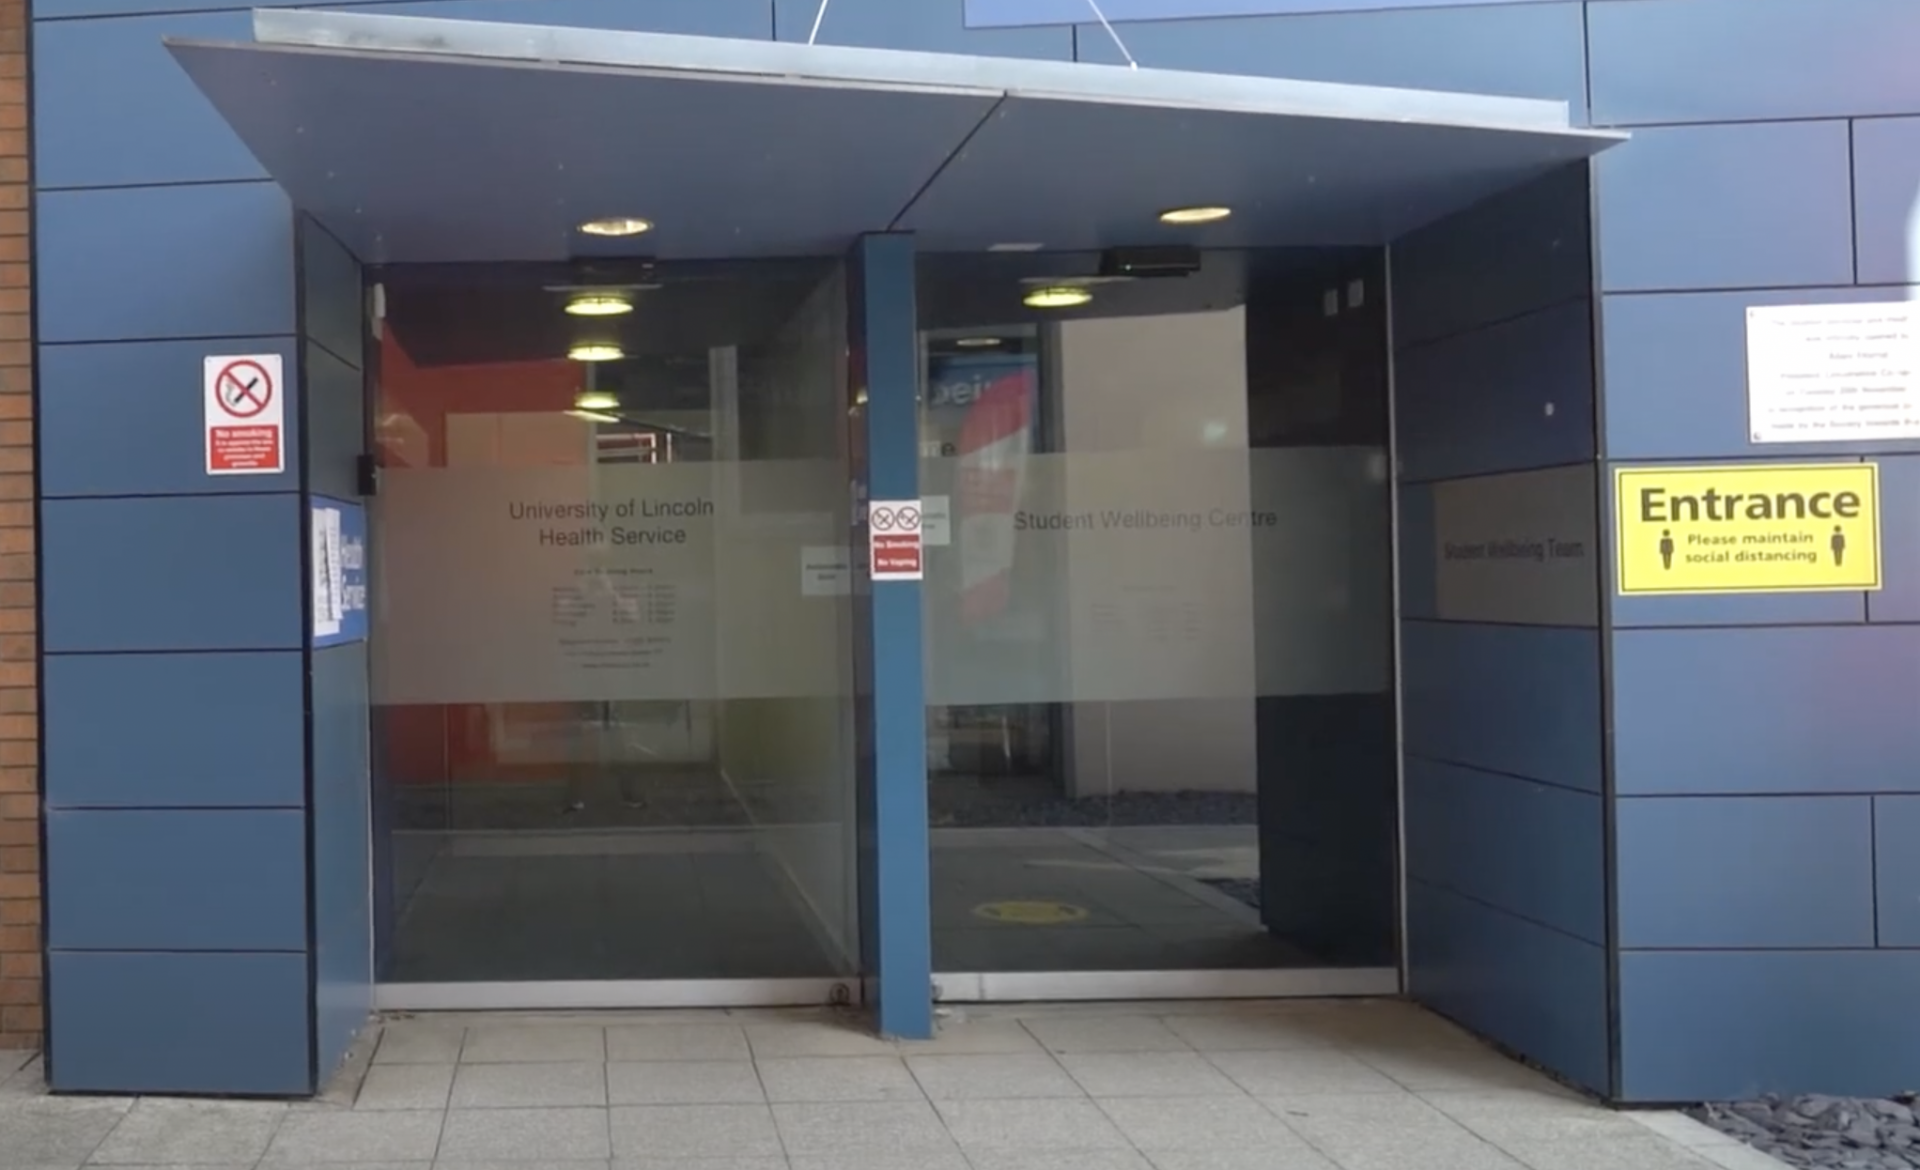 The doors to the Lincoln Health Service